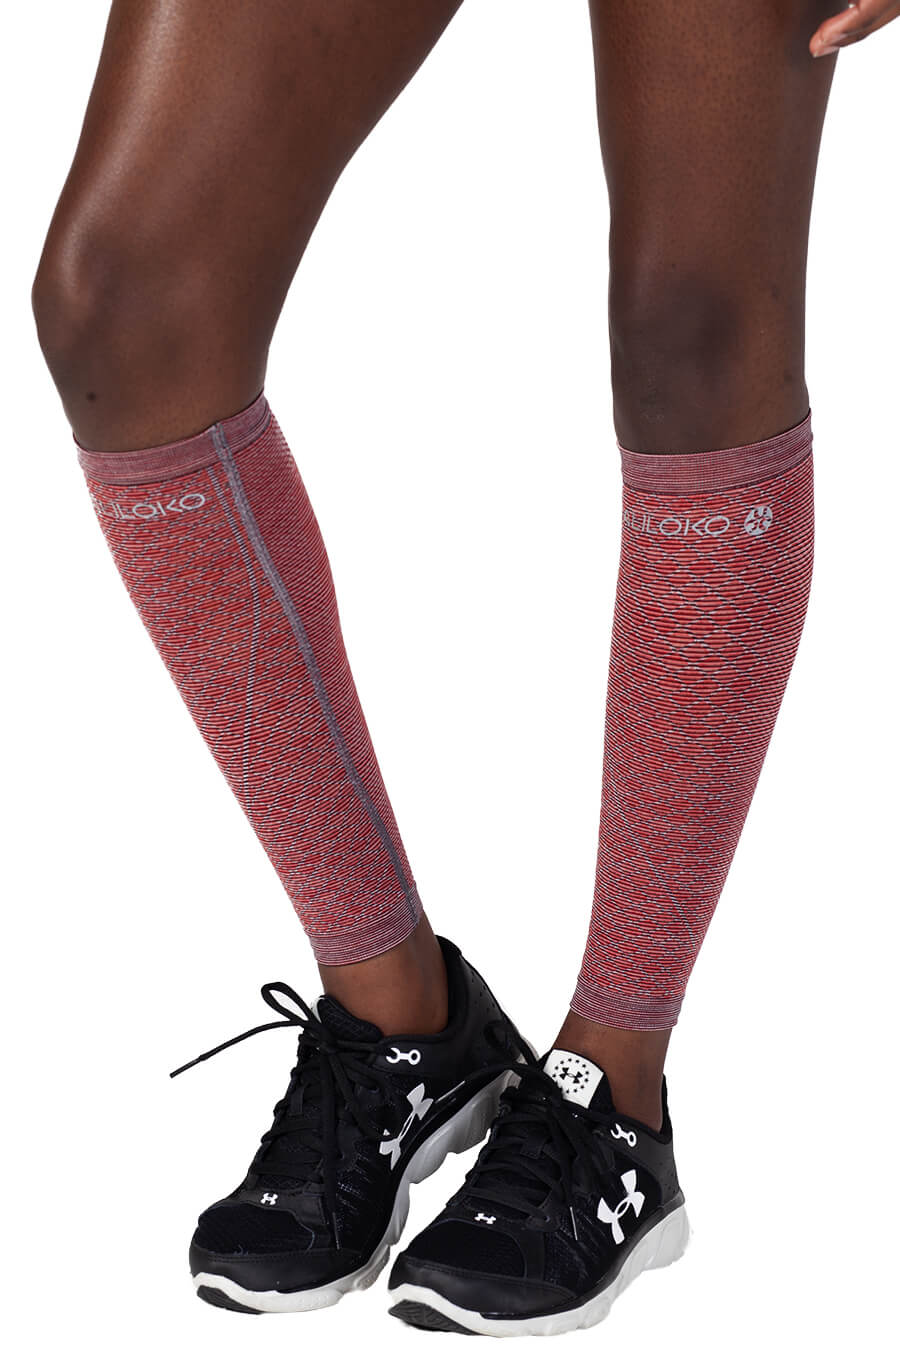 Recovery Calf Sleeves for Women - Caliloko